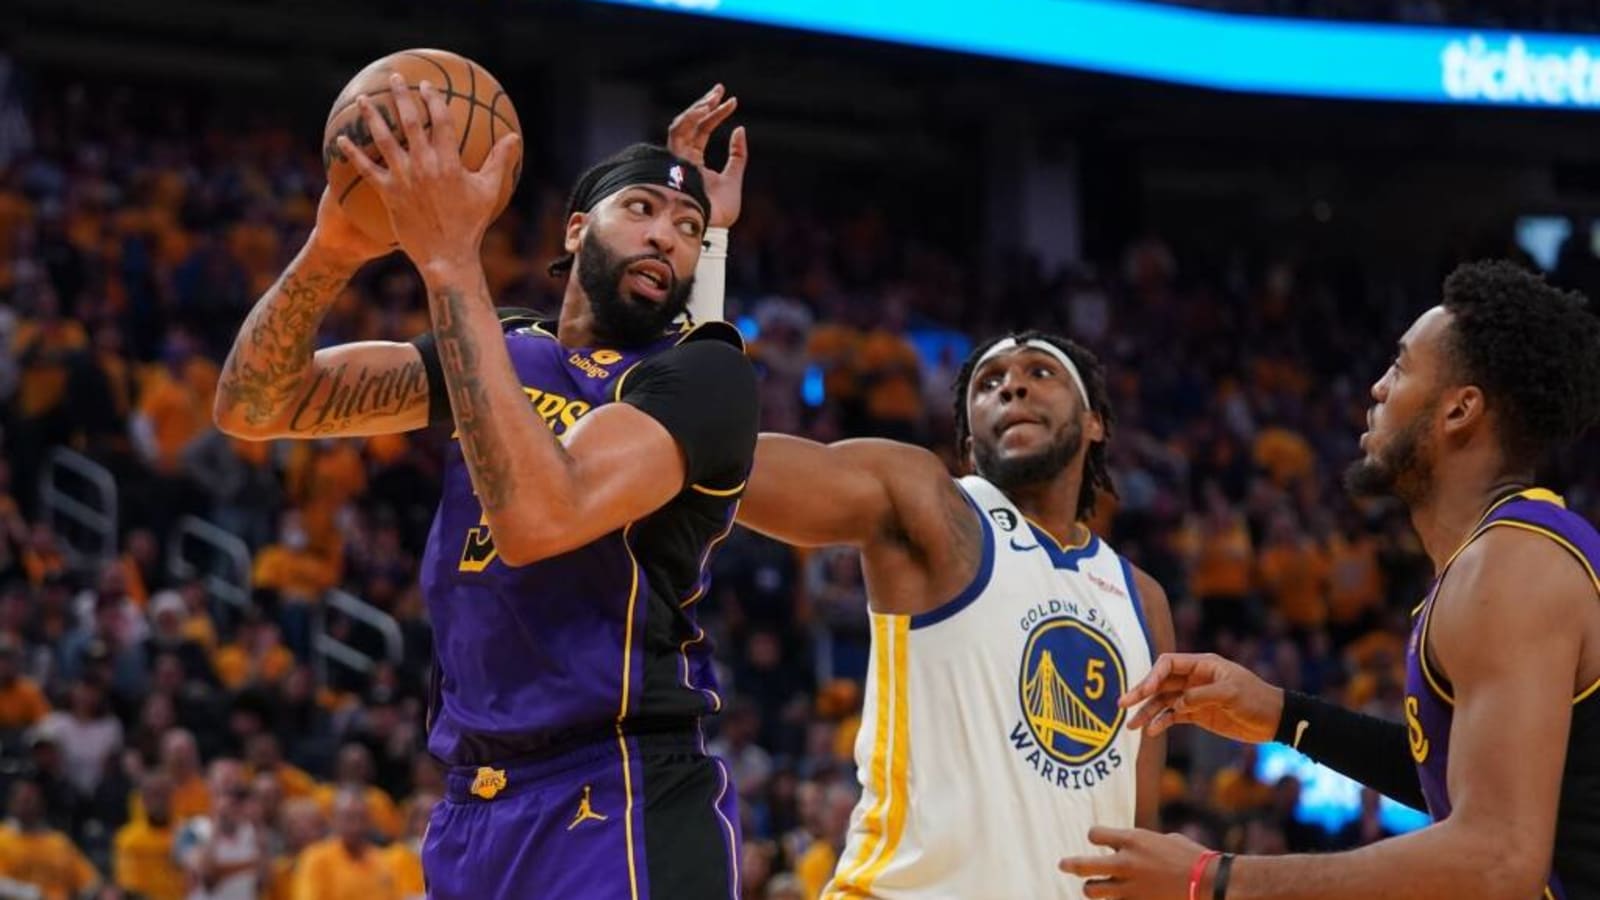 Watch Los Angeles Lakers vs. Golden State Warriors in Game 3: NBA Playoffs online free live stream, start time and TV channel